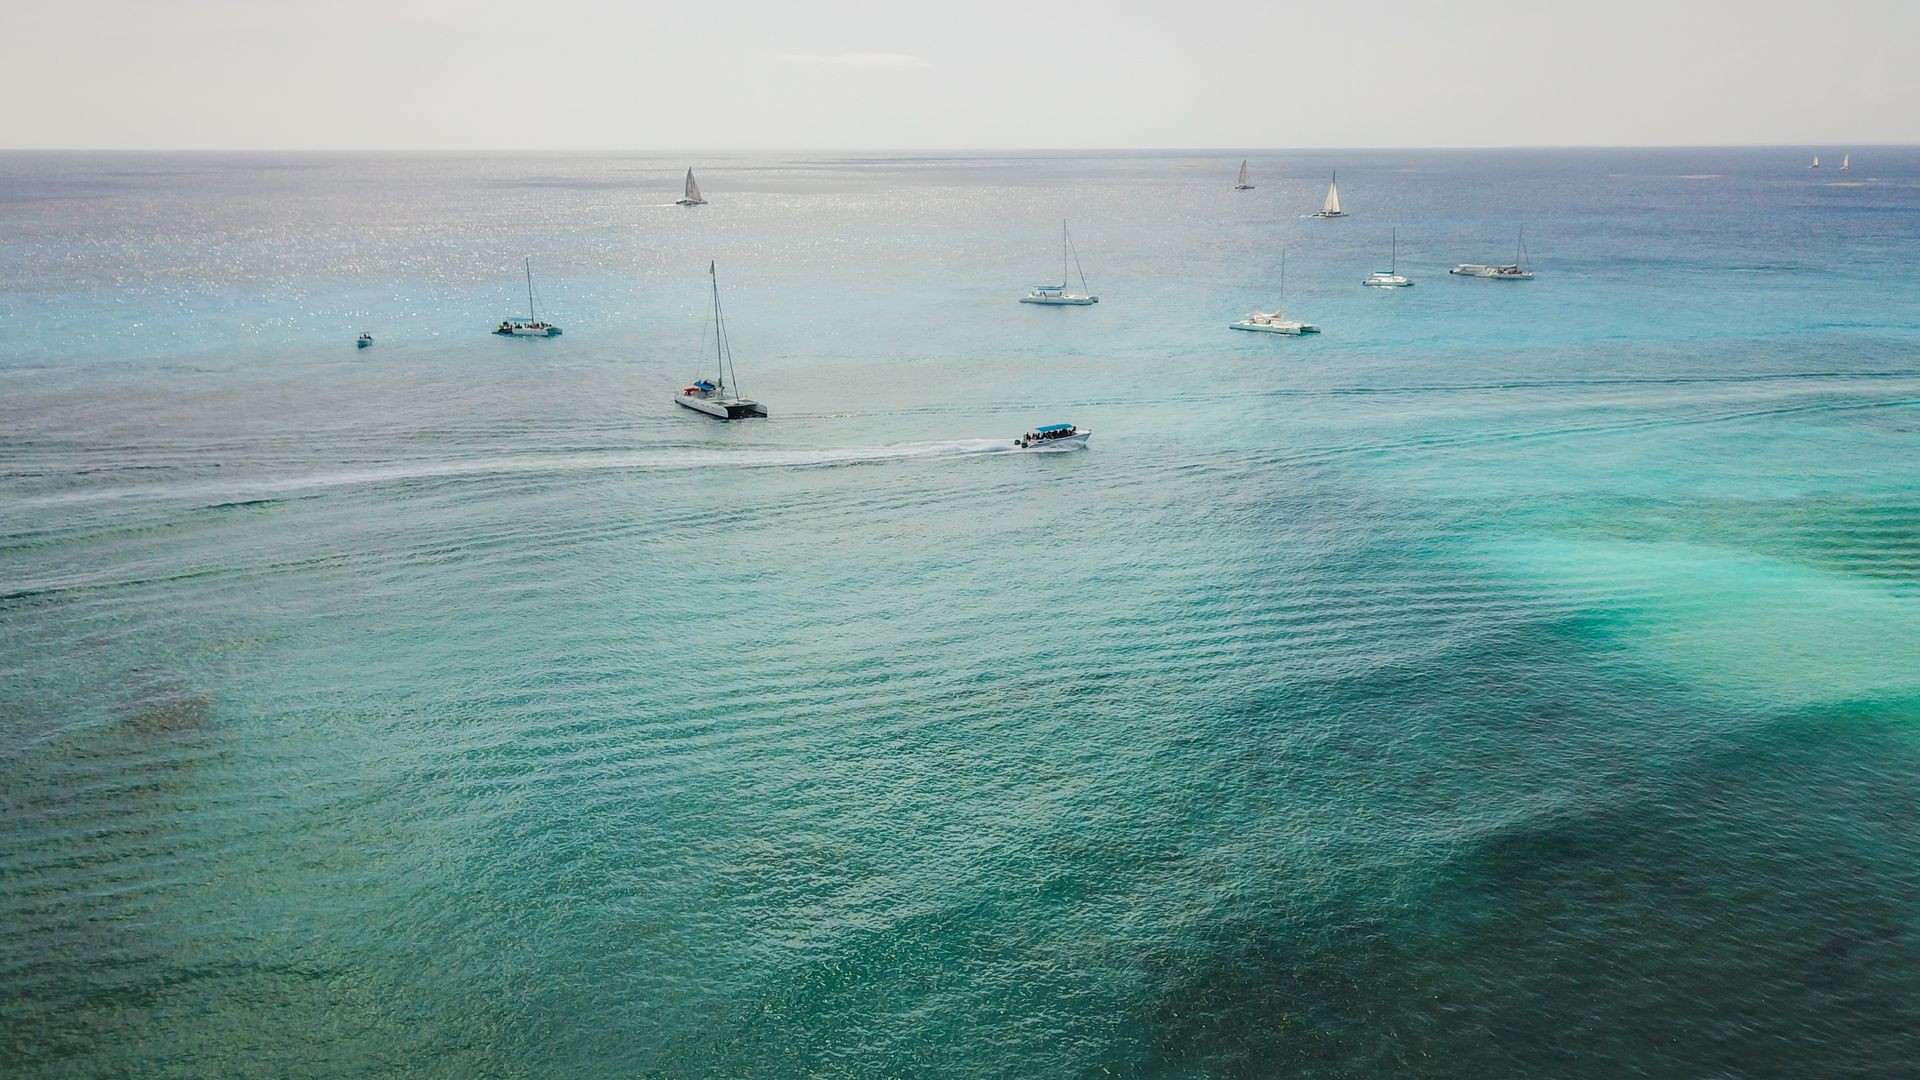 Boats on the sea. The boat is floating on the emerald clear sea between coral reefs. Aerial view